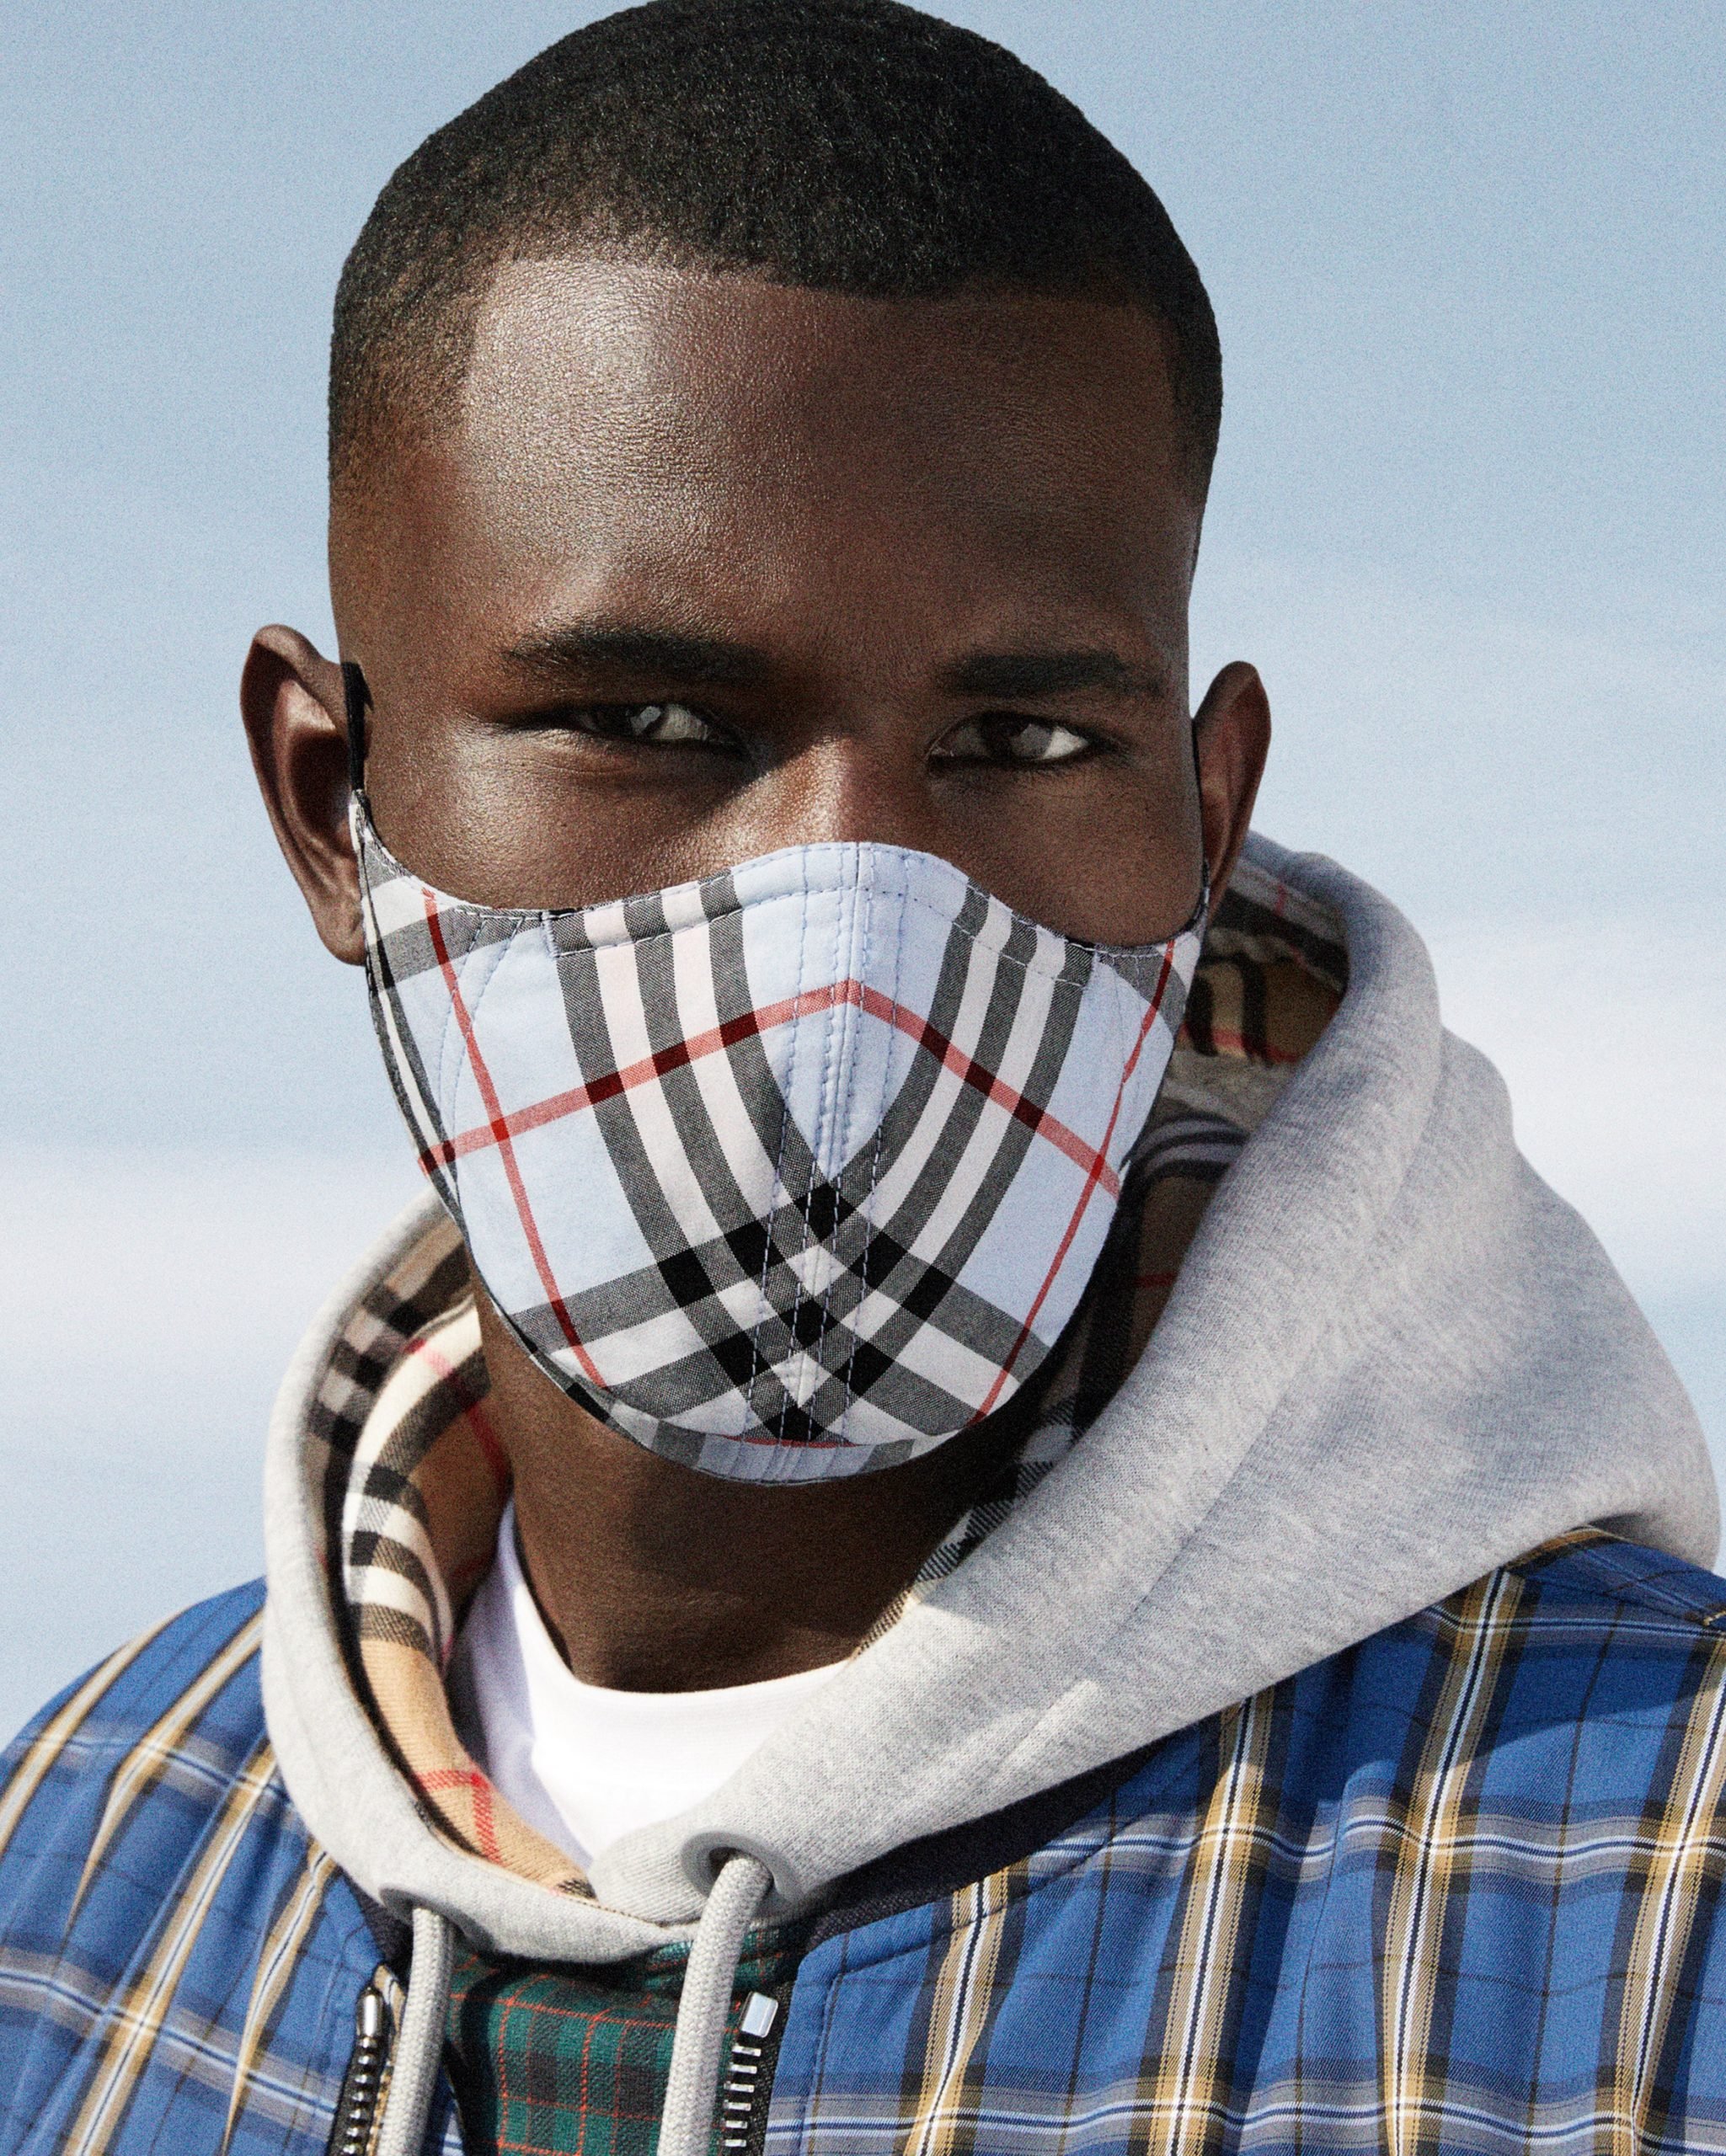 Burberry face masks are made of plaid cotton